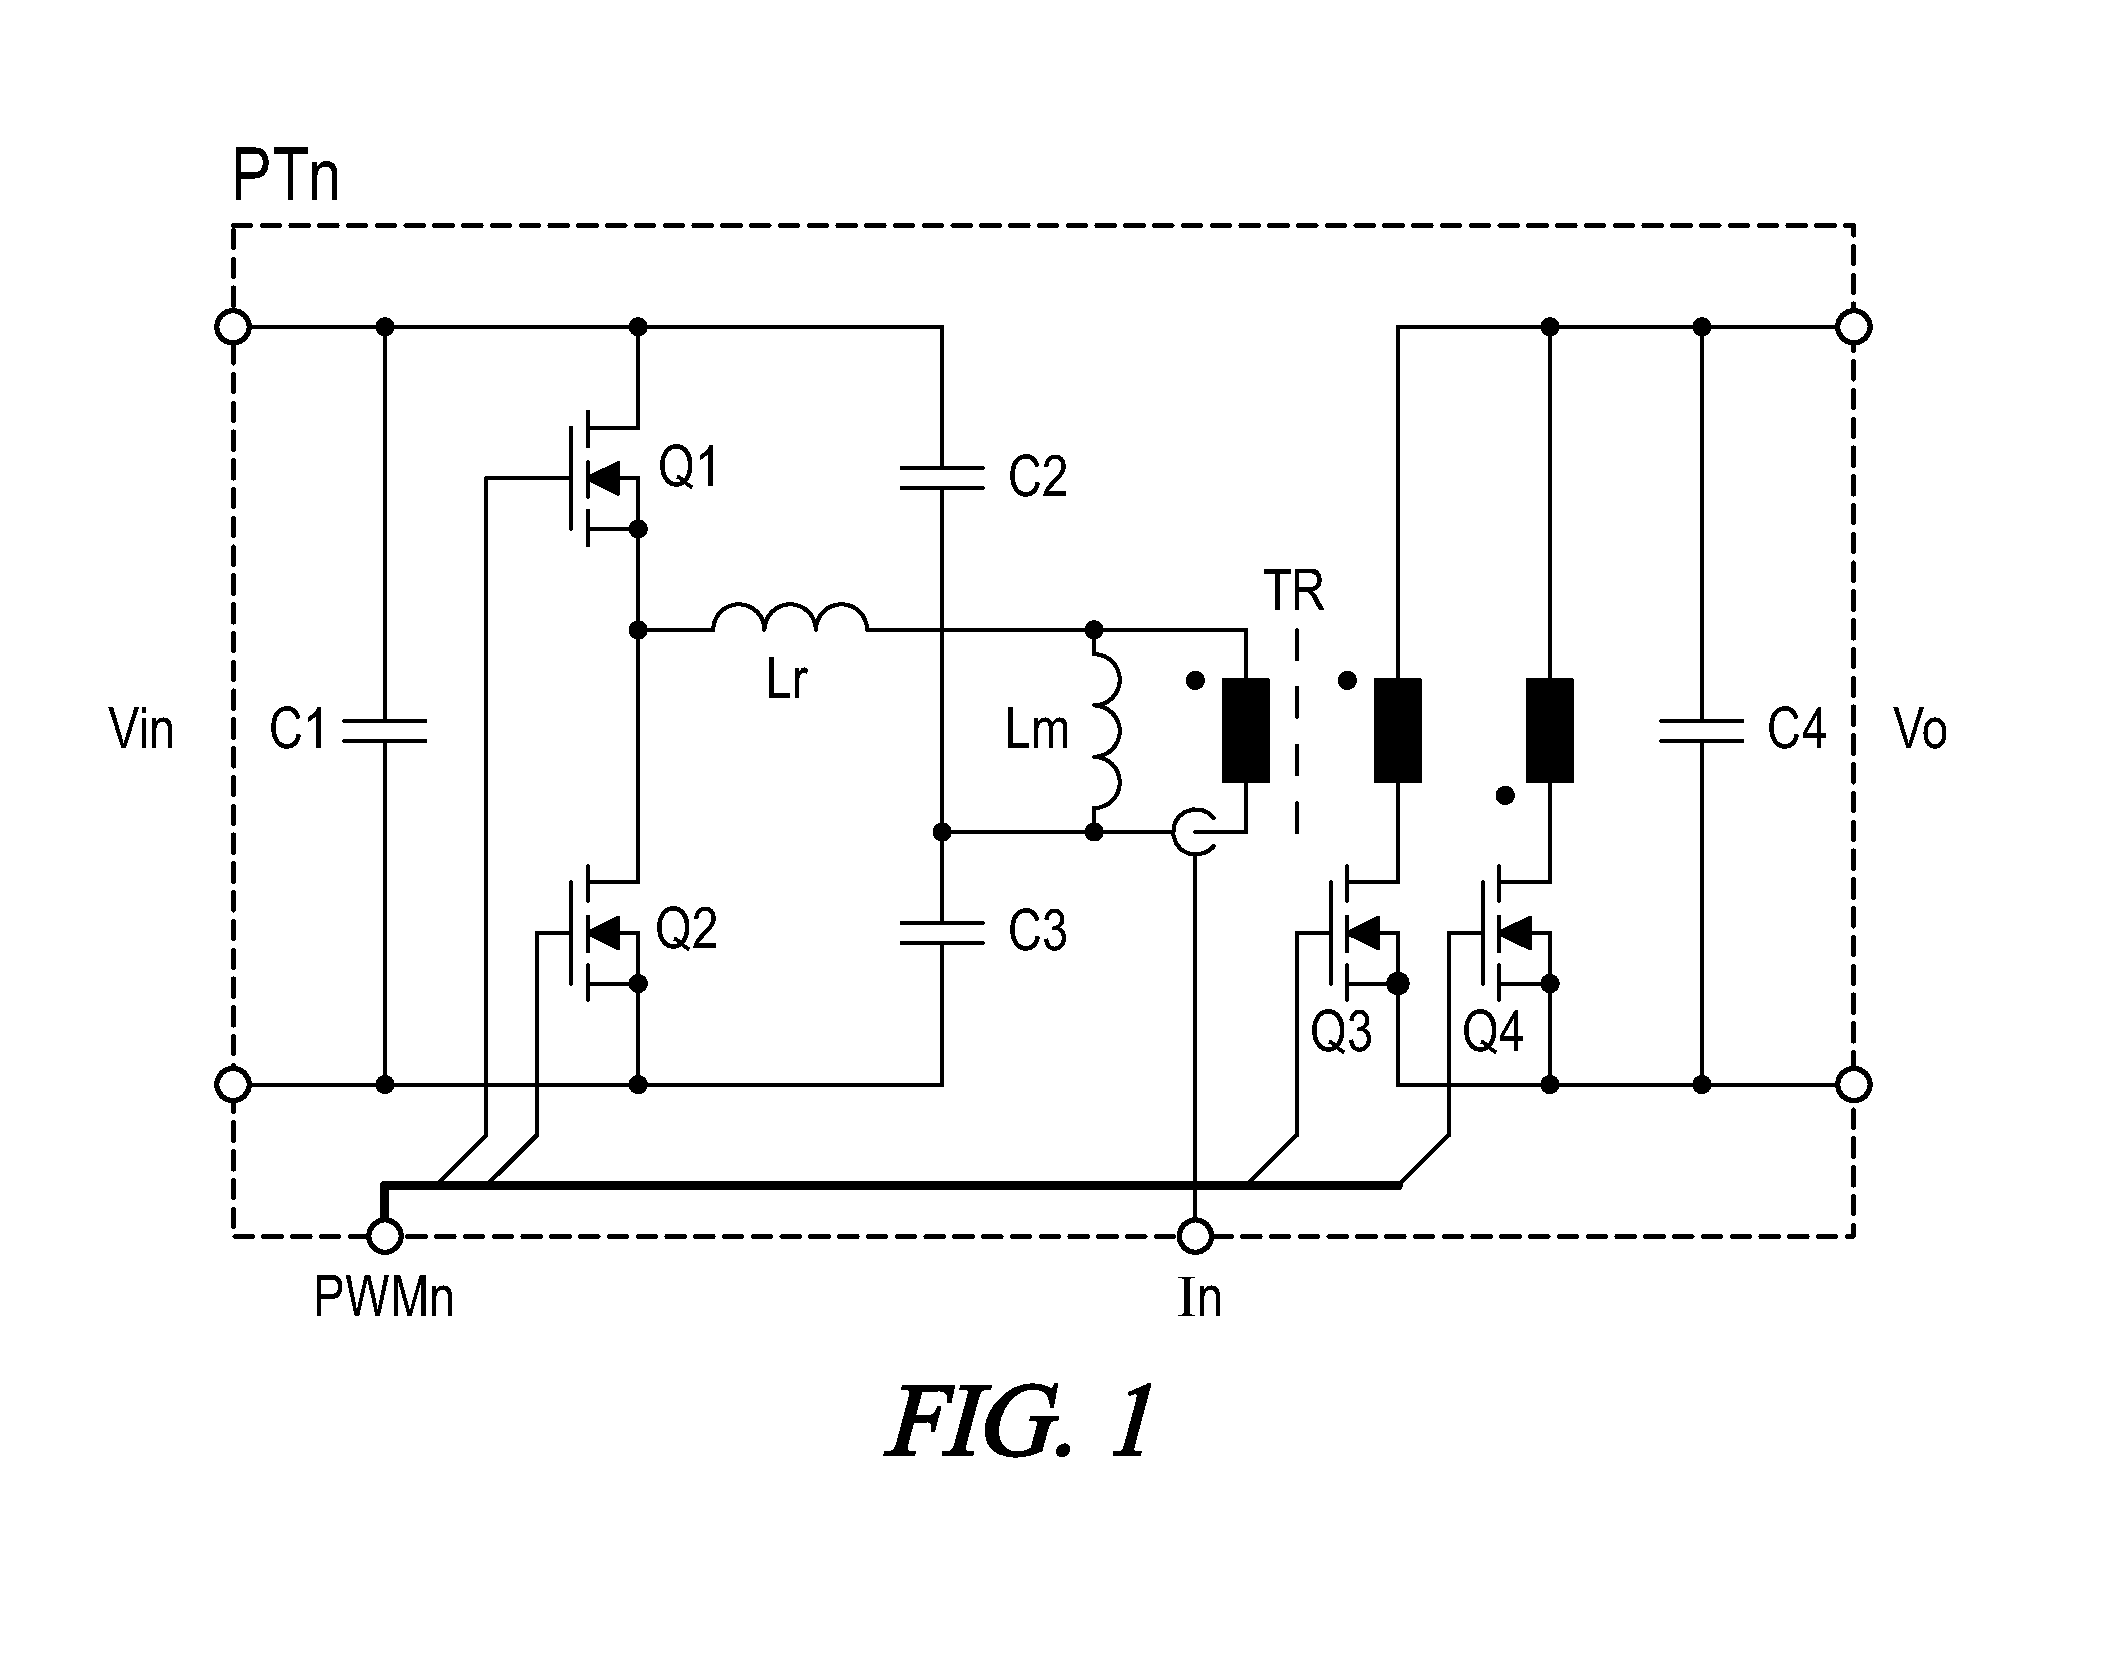 Multiphase converter with active and passive internal current sharing